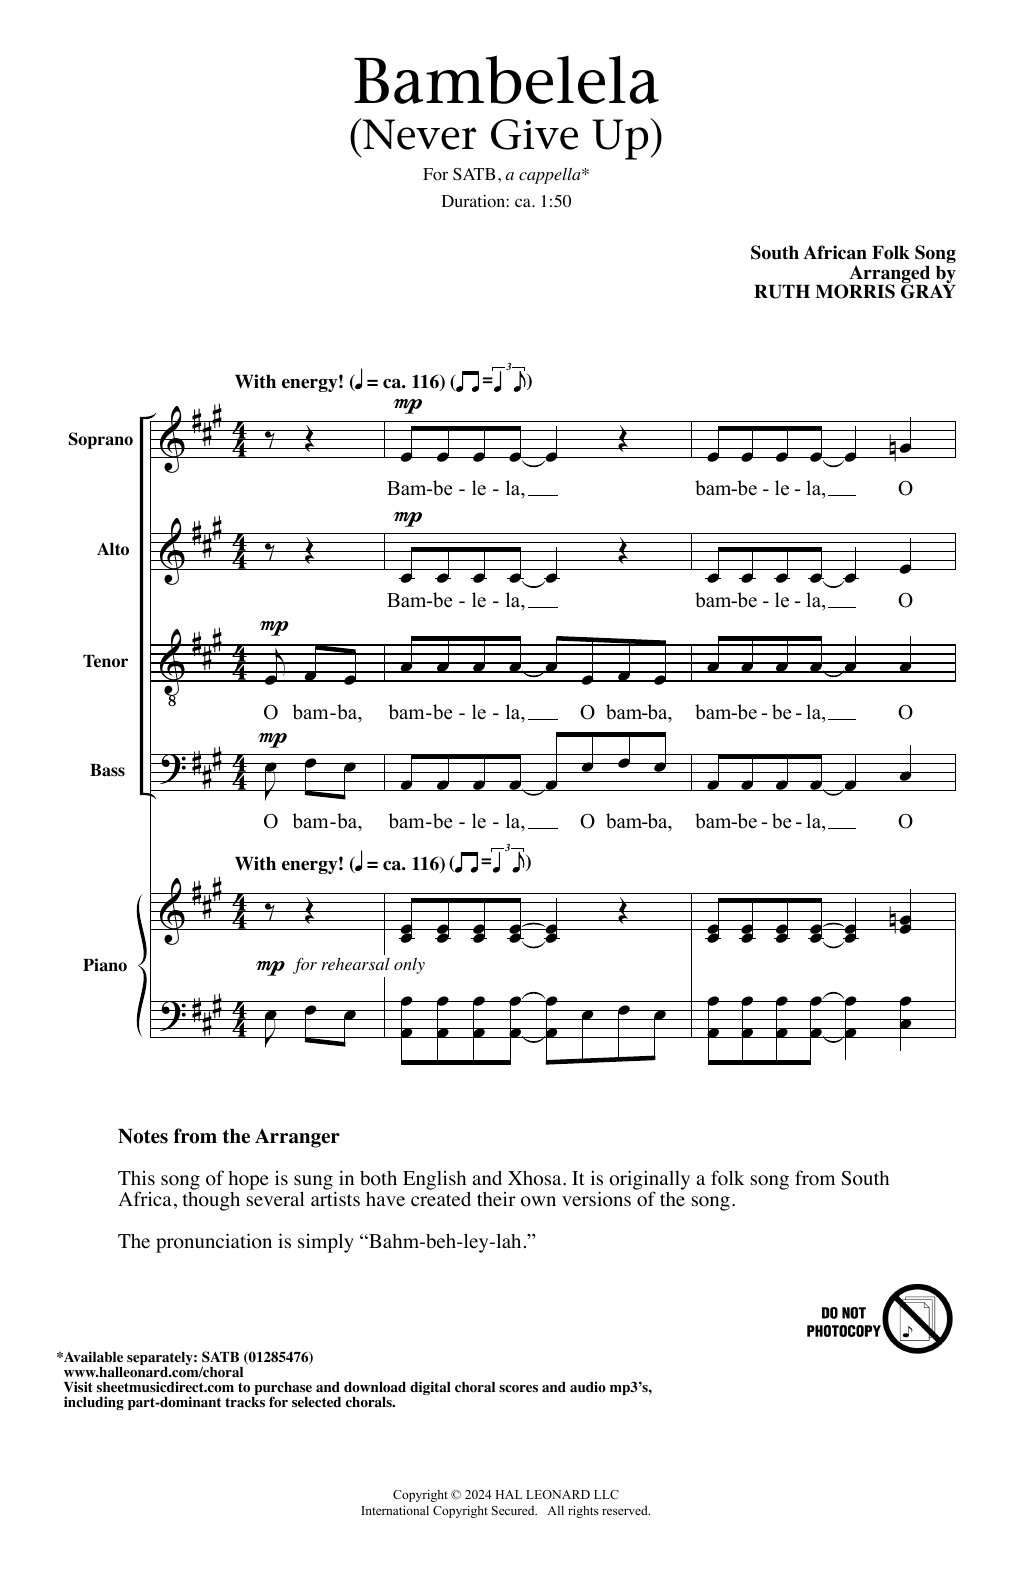 South African Folksong Bambelela (Never Give Up) (arr. Ruth Morris Gray) sheet music notes printable PDF score